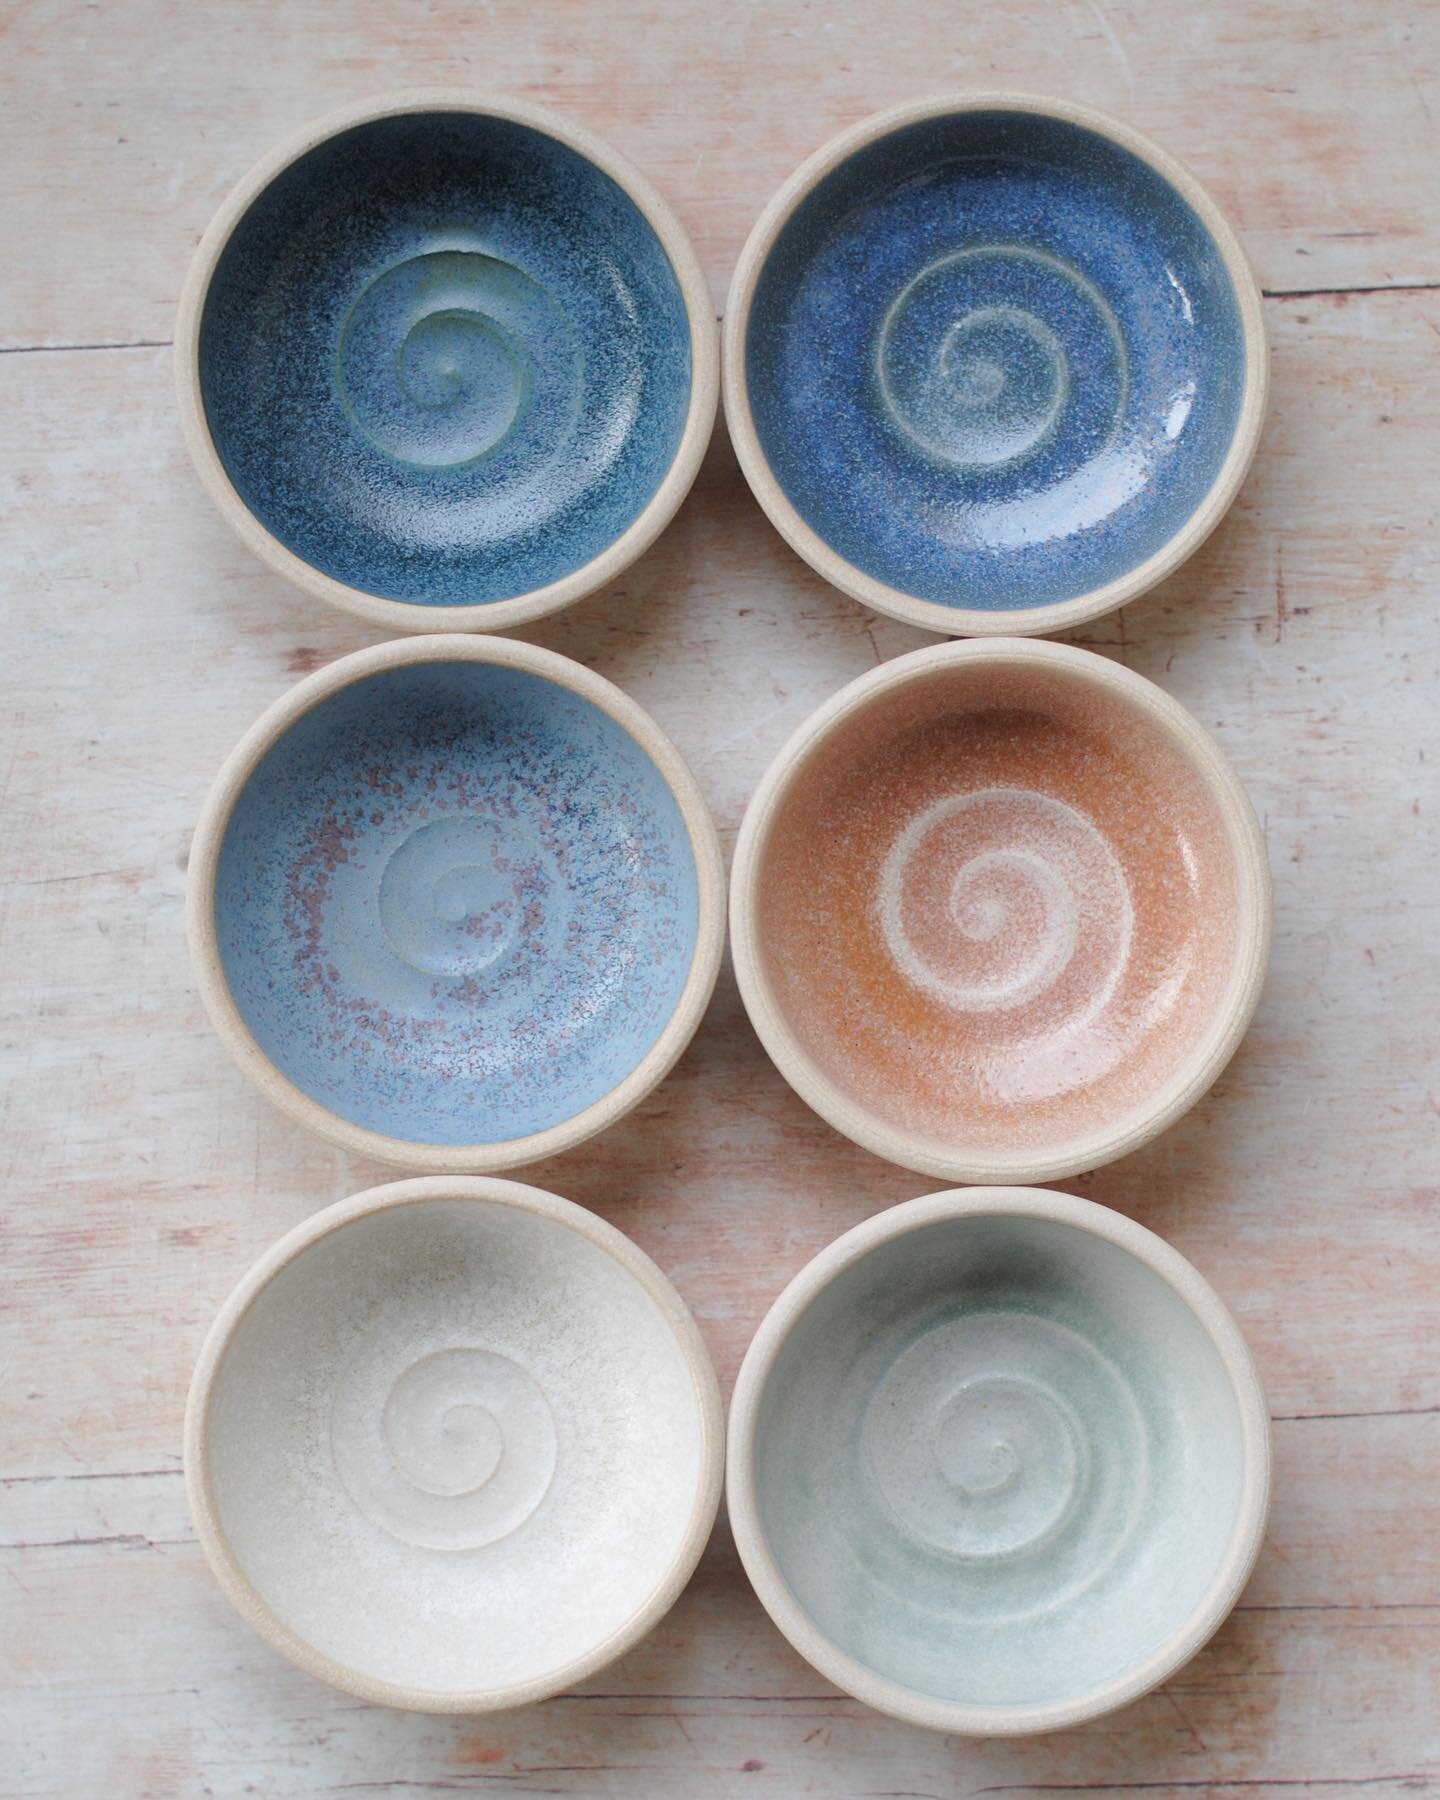 Pick a favourite?! ✨

It&rsquo;s probably rude for me to pick (a bit like having a favourite child?!) buuuuut if you&rsquo;re twisting my arm&hellip; I love the one on the top right - it&rsquo;s a glaze I don&rsquo;t use often and it&rsquo;s so delig